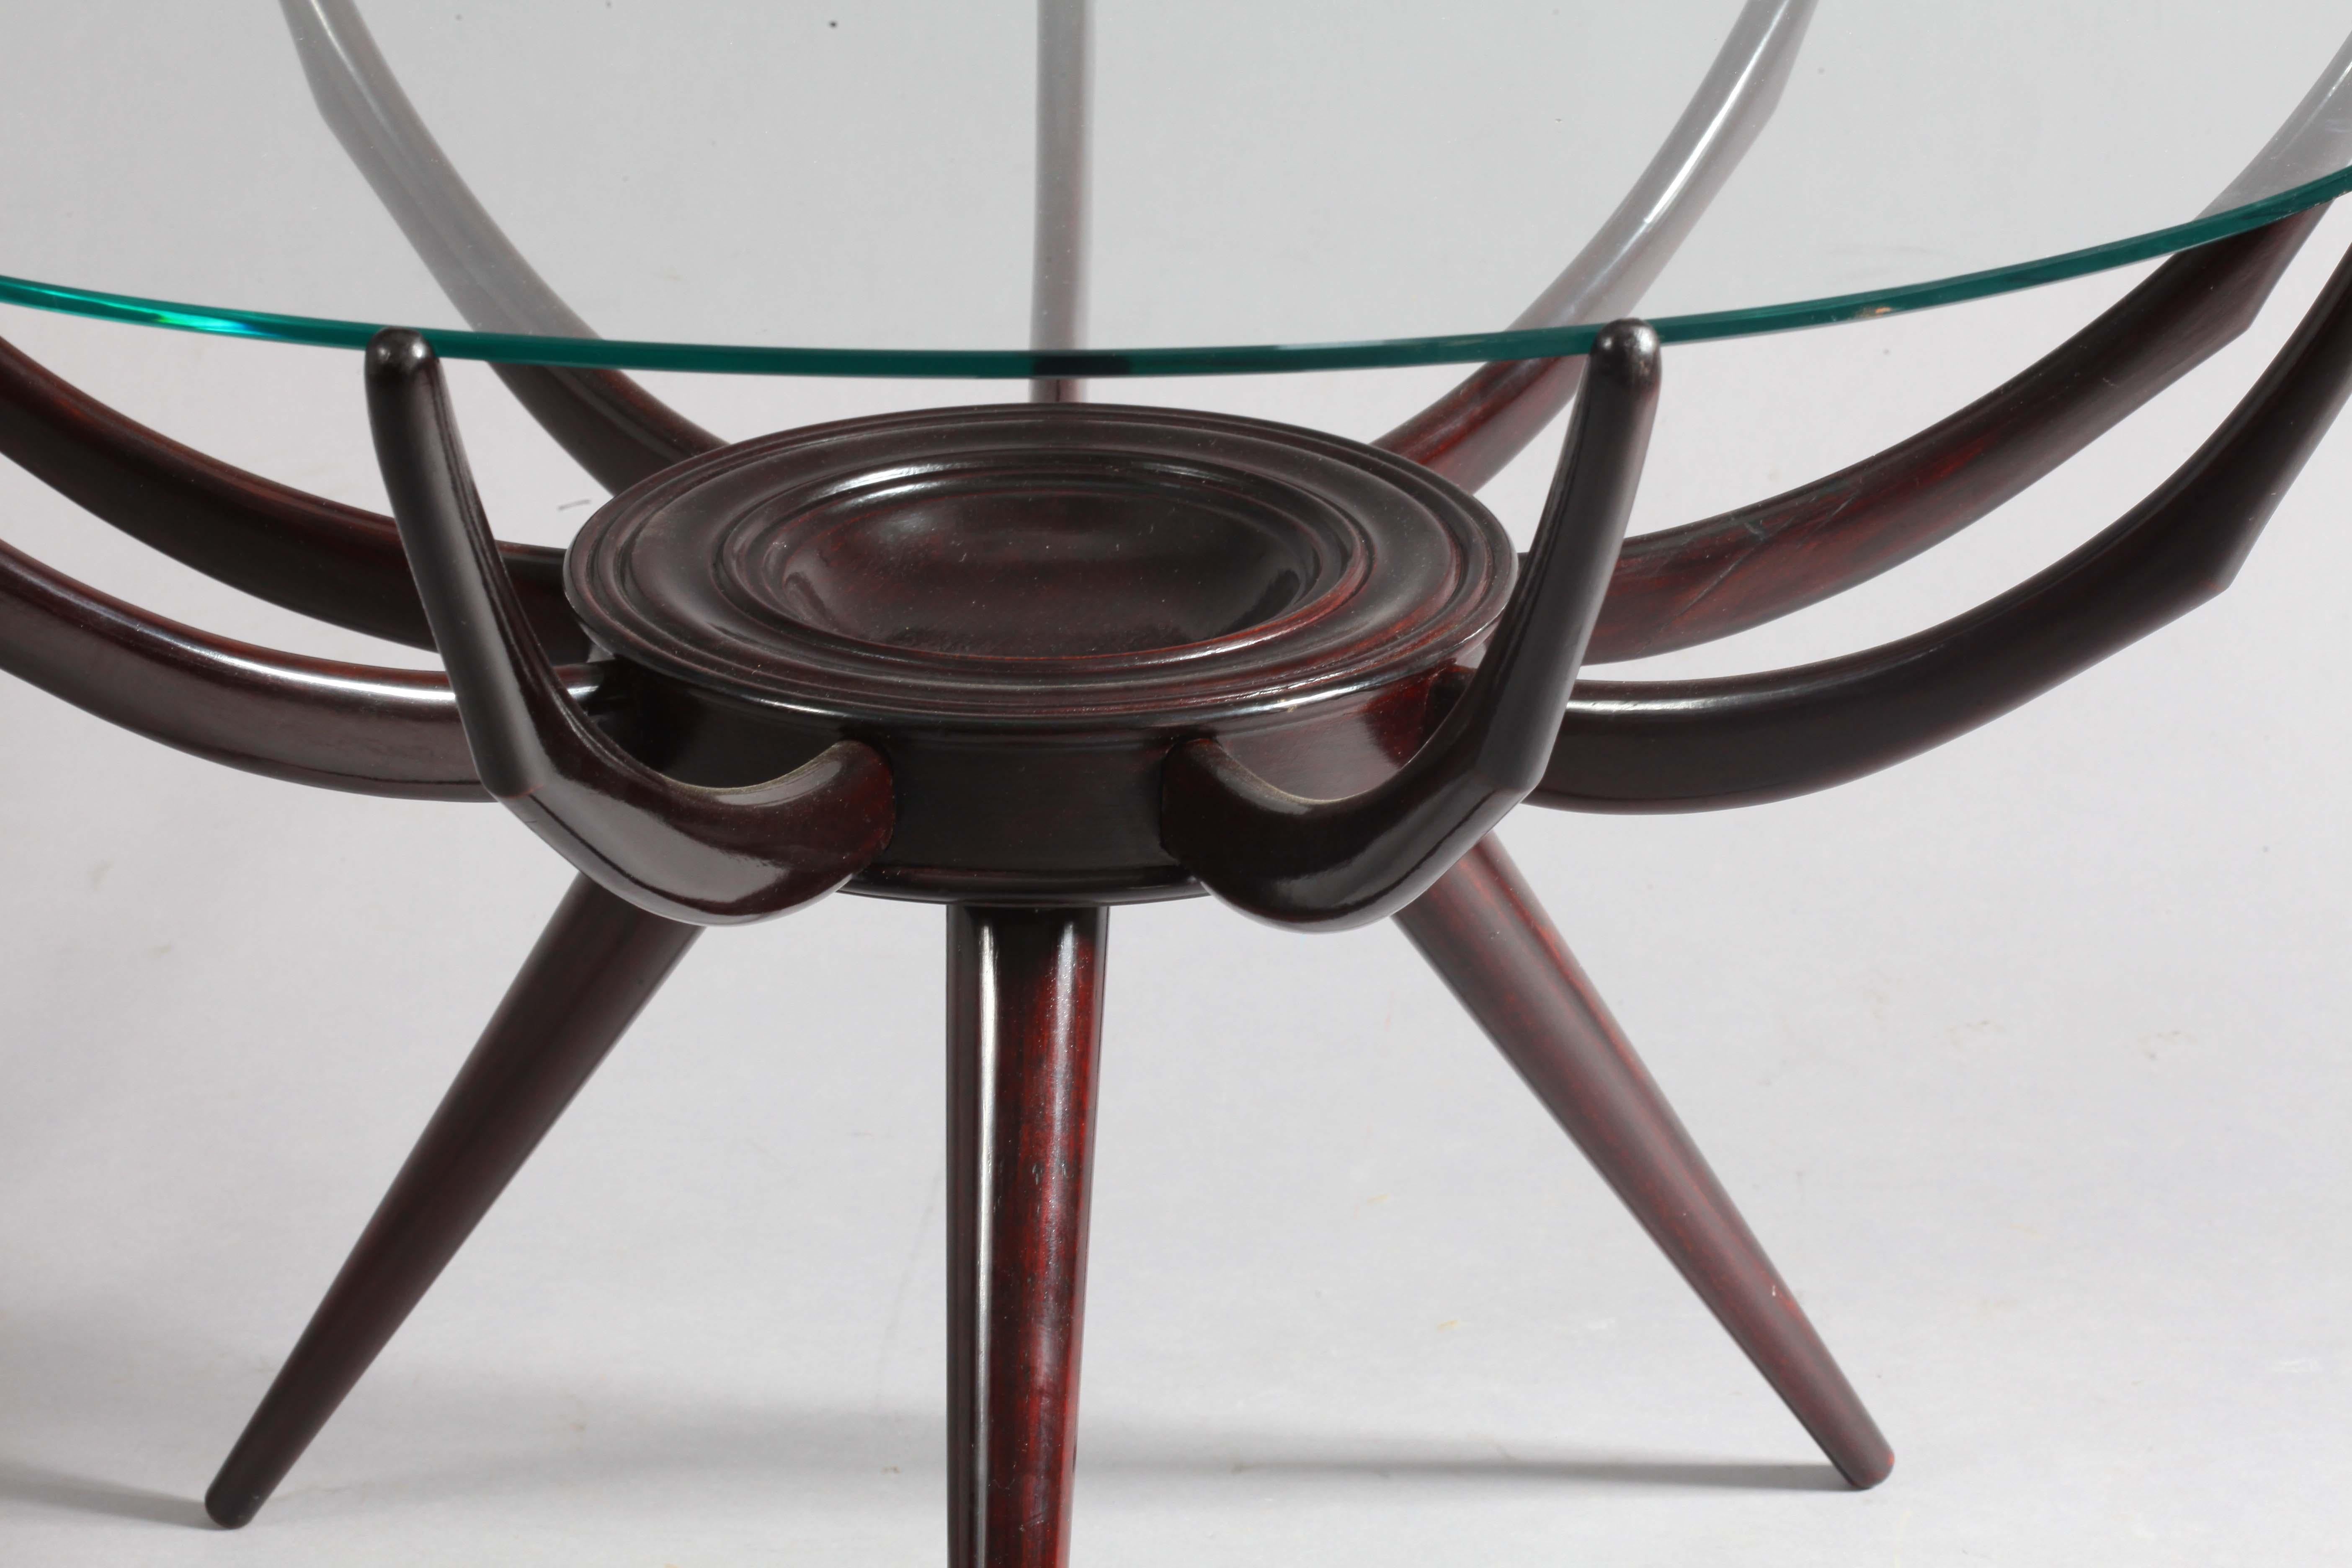 Coffee table modell spider
Carlo de Carli
Italy, 1950
wood, round glass plate.